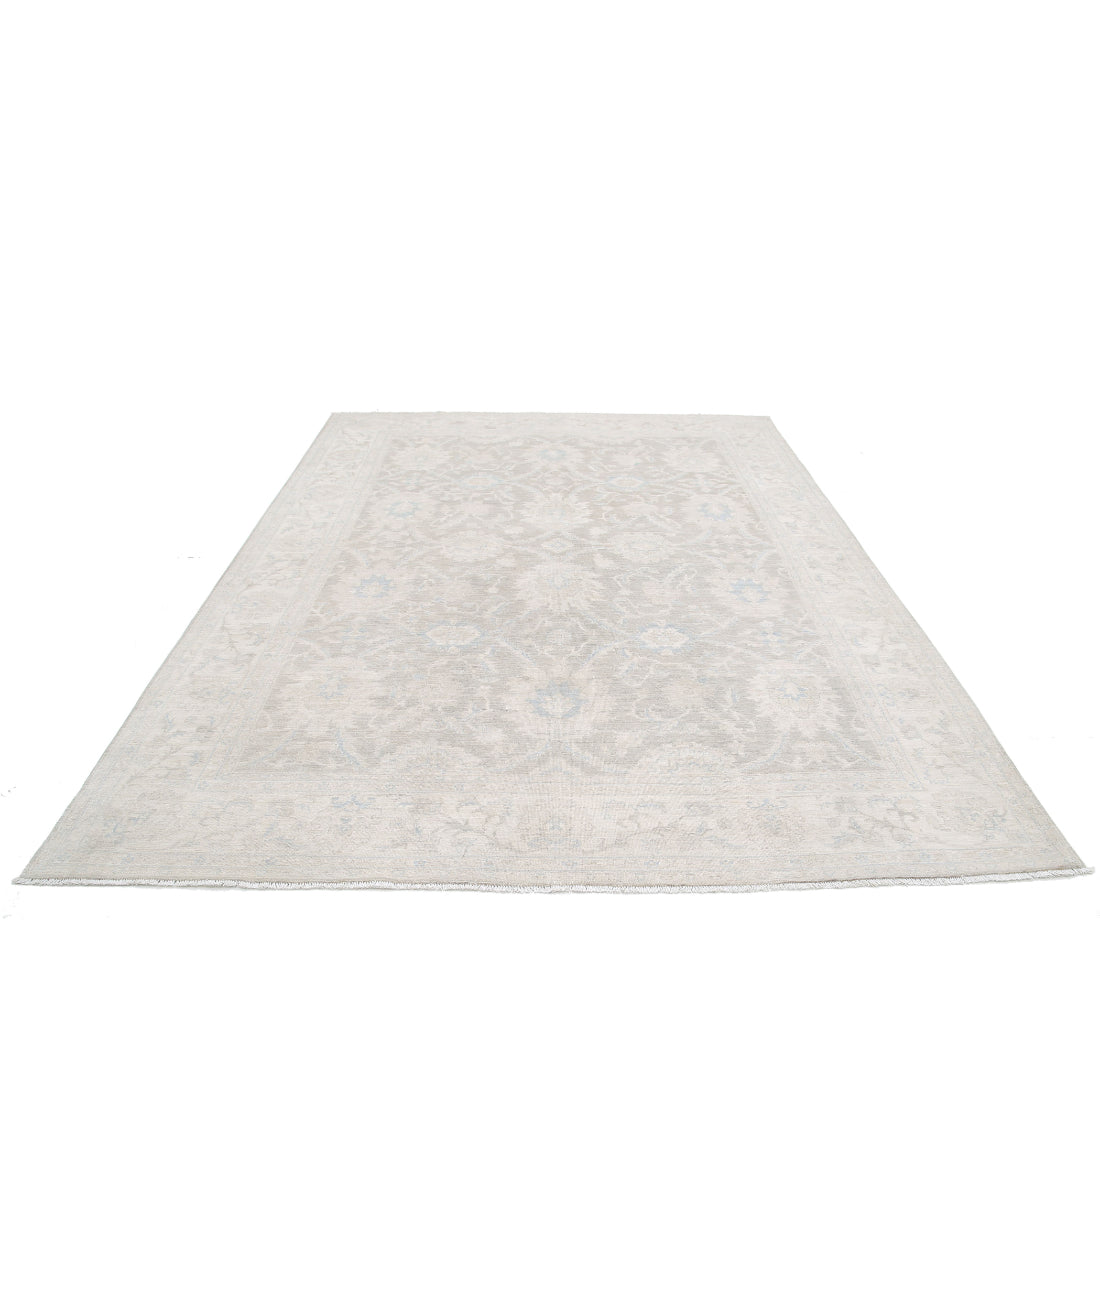 Serenity 8'4'' X 11'1'' Hand-Knotted Wool Rug 8'4'' x 11'1'' (250 X 333) / Ivory / Grey